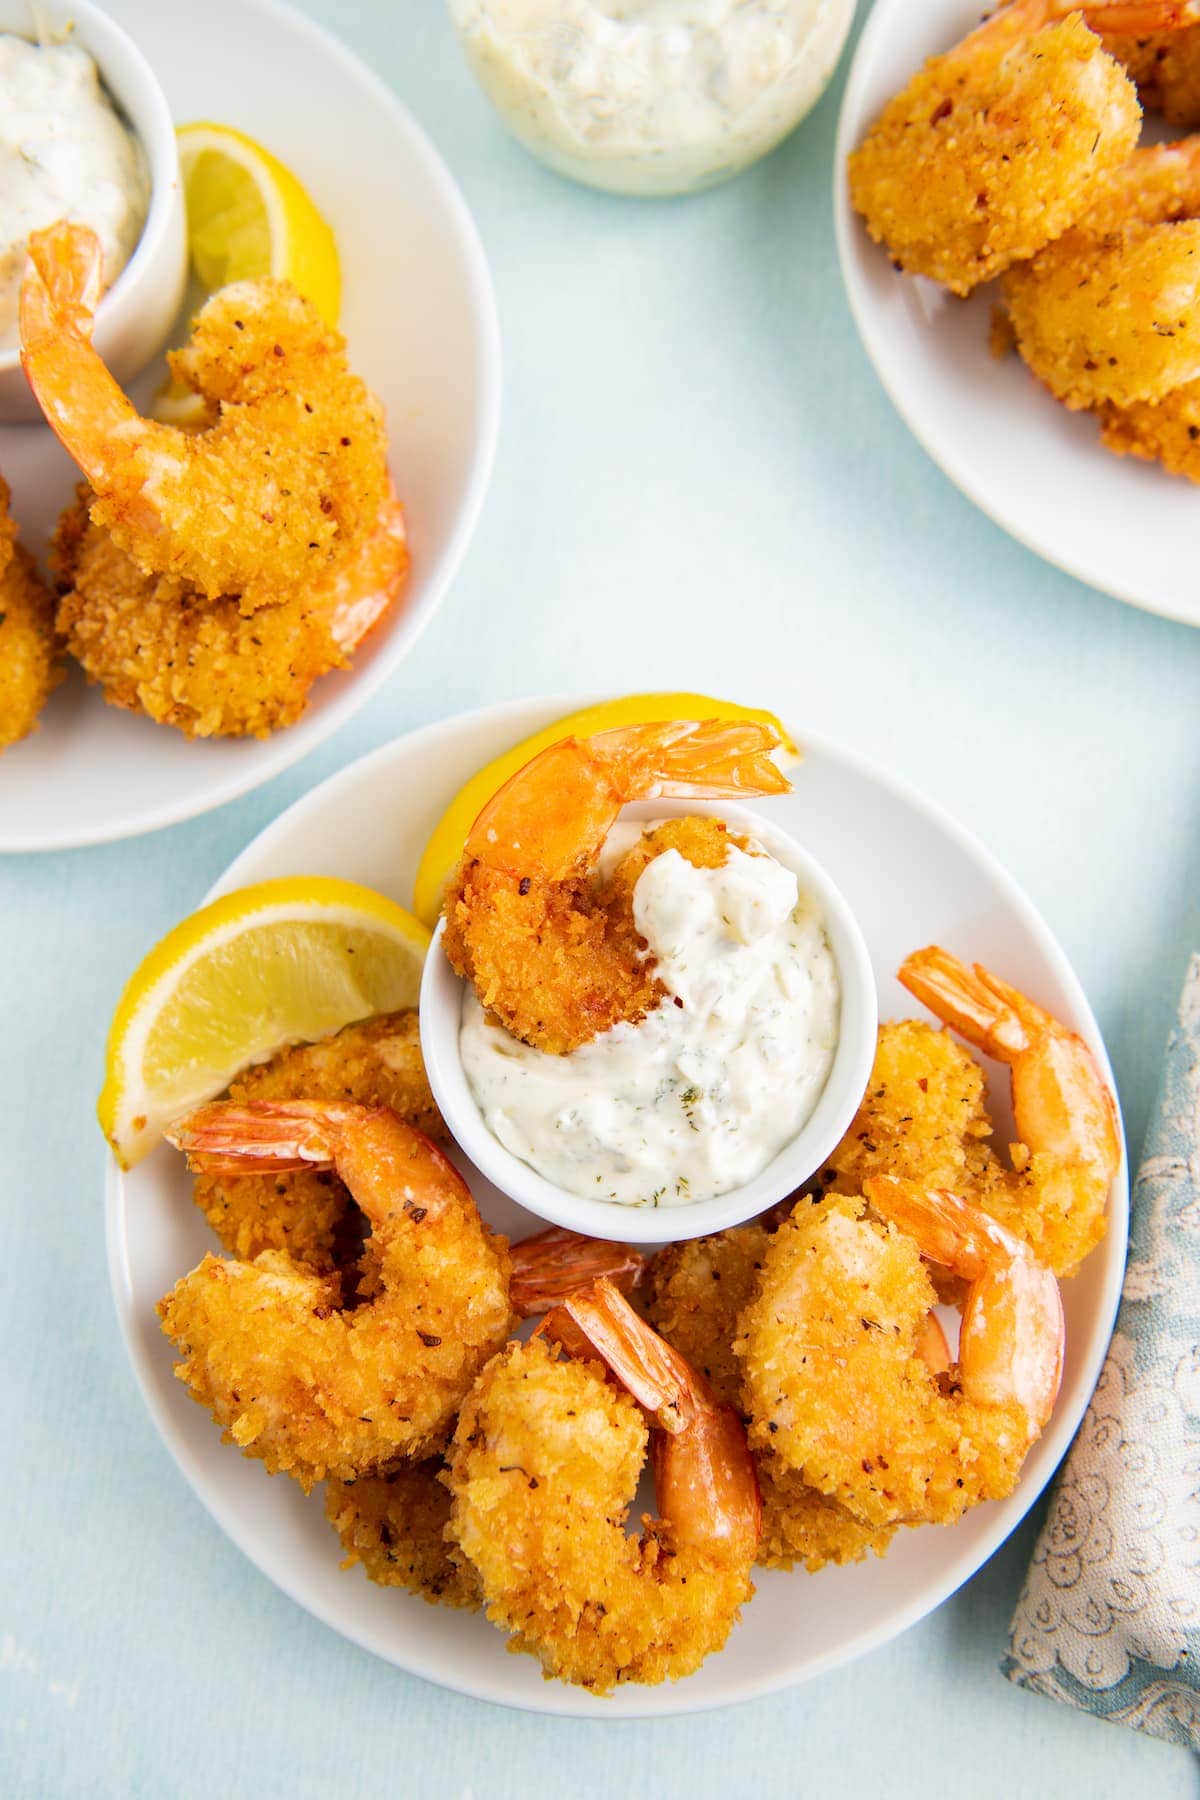 Crispy shrimp on white plates with a bowl of tartar sauce for dipping.